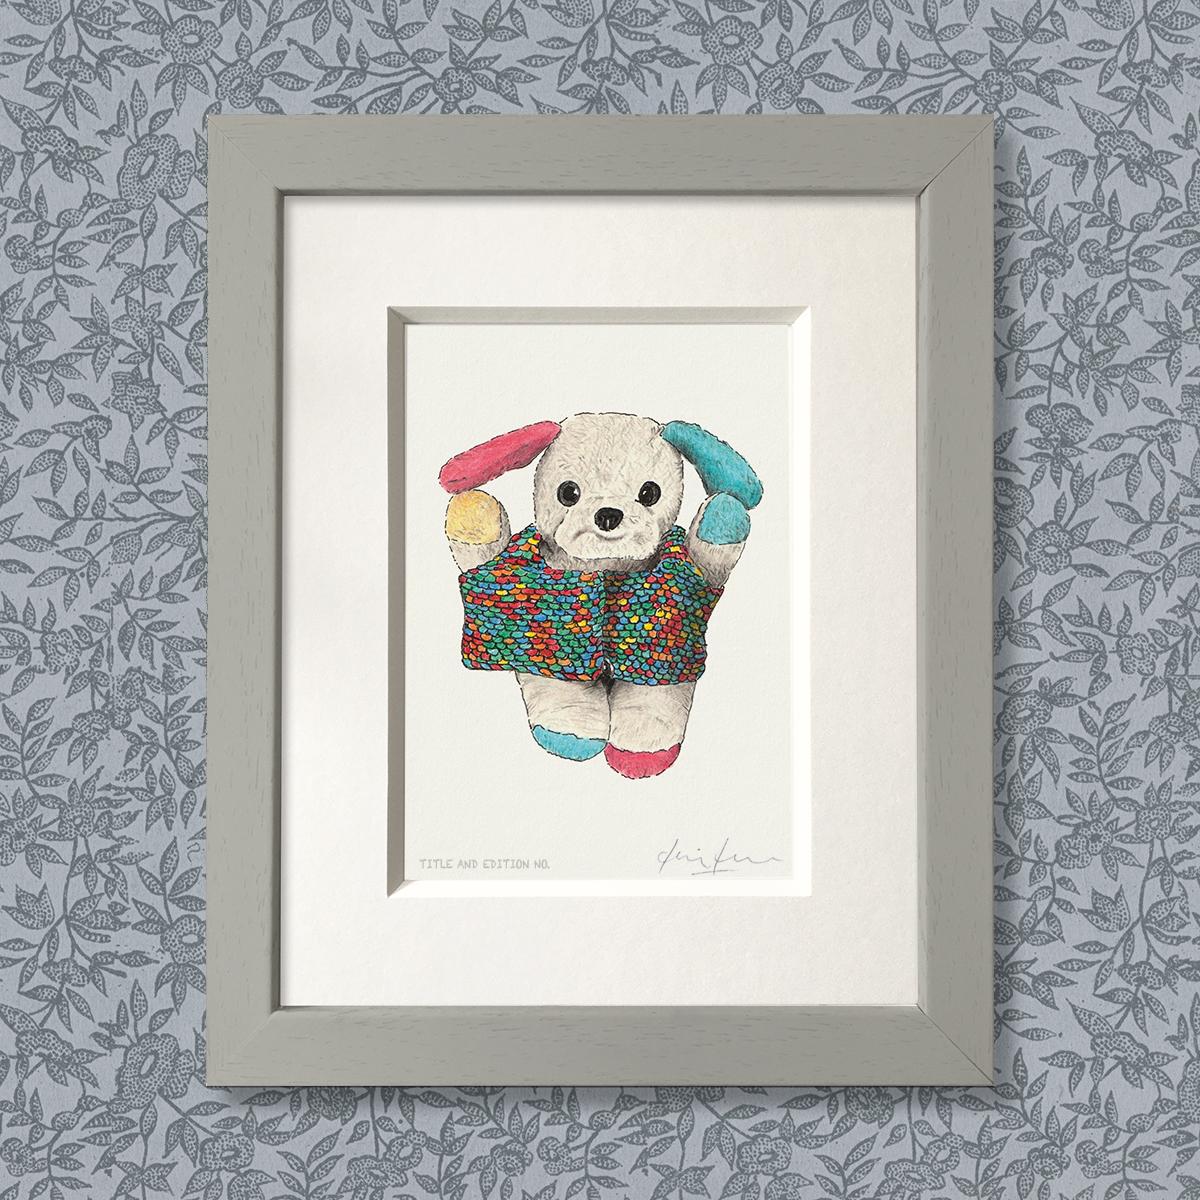 Limited edition print from a pen, ink and coloured pencil drawing of a soft toy in a knitted sweater in a grey frame